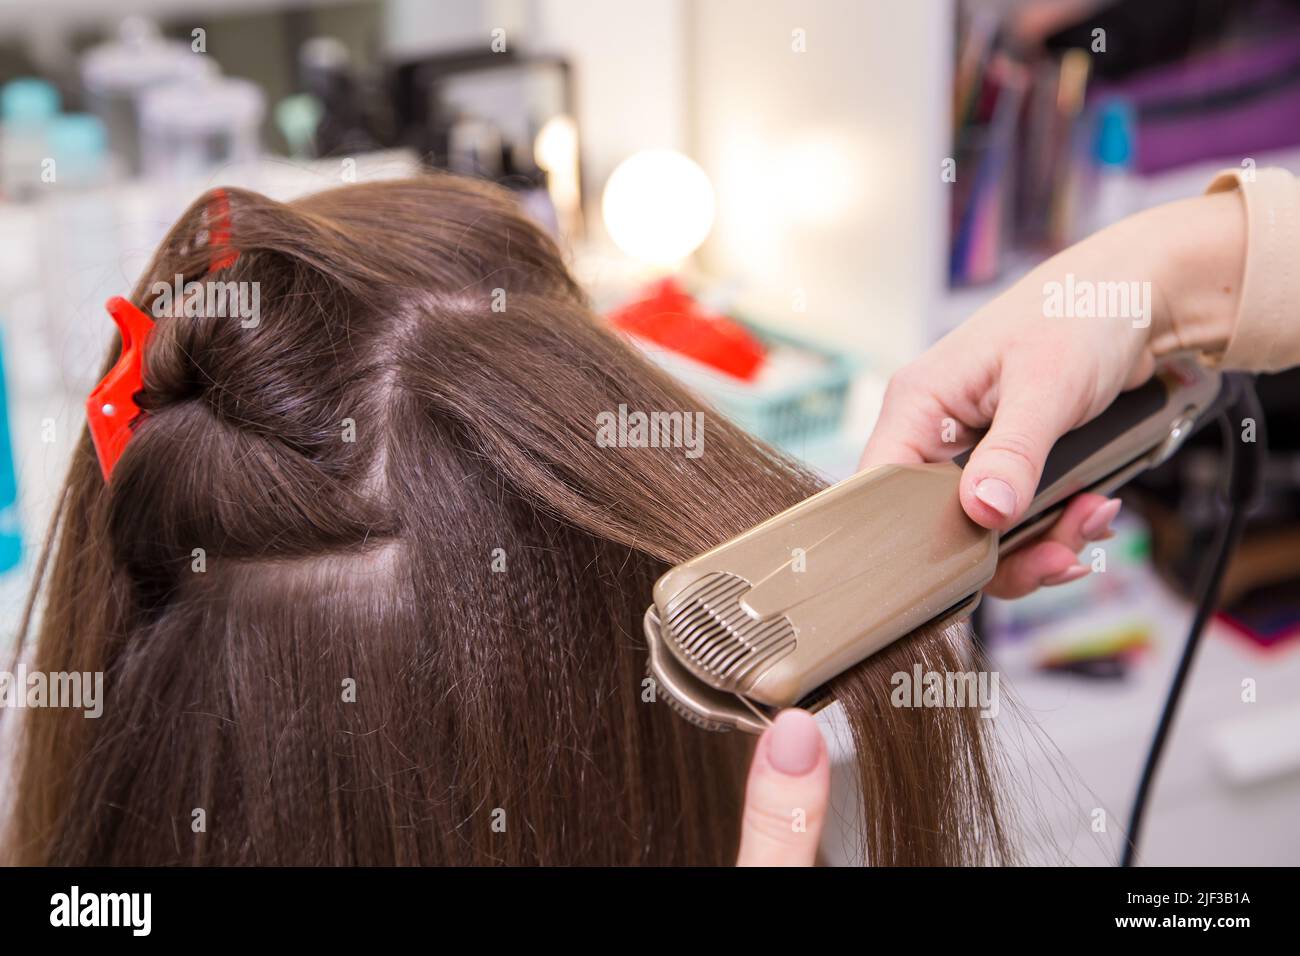 Close-up of a woman's hand straightens a lock of hair with a curling iron. The hairdresser makes a hairstyle for a young woman. Barber shop, business concept. Beauty salon, hair care. Stock Photo